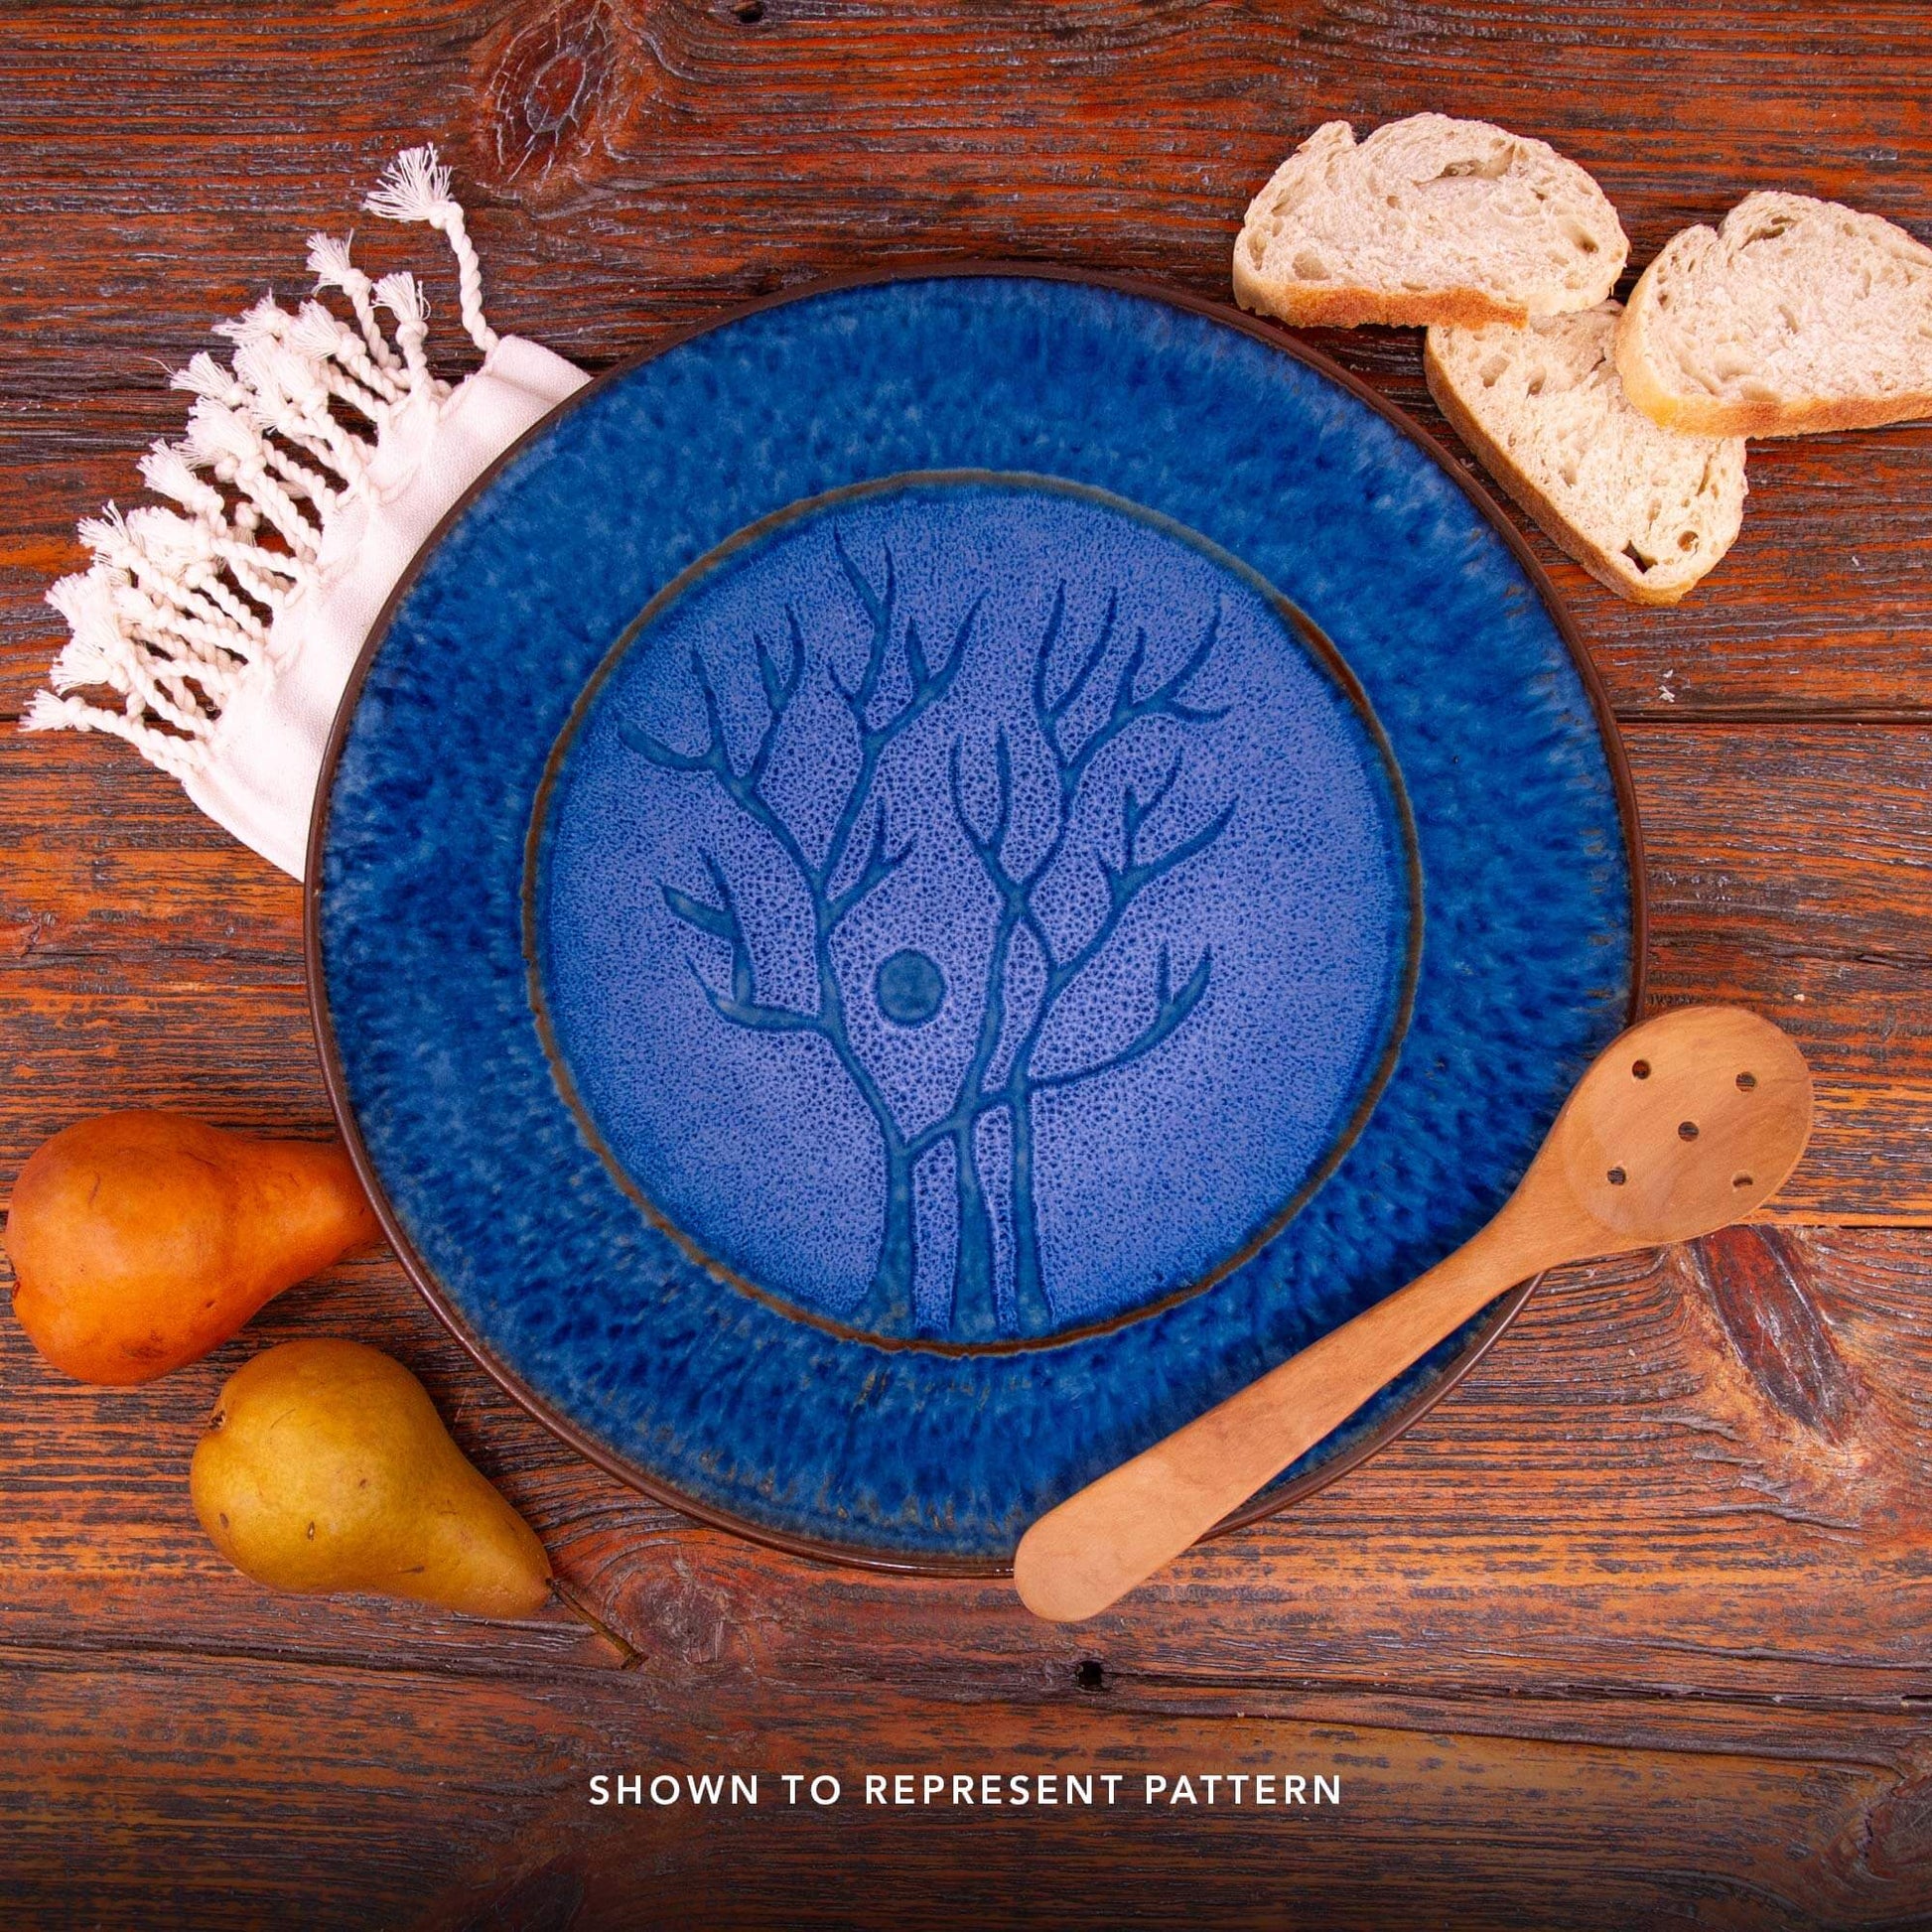 Handmade Pottery Boat Platter in Blue Tree pattern made by Georgetown Pottery in Maine